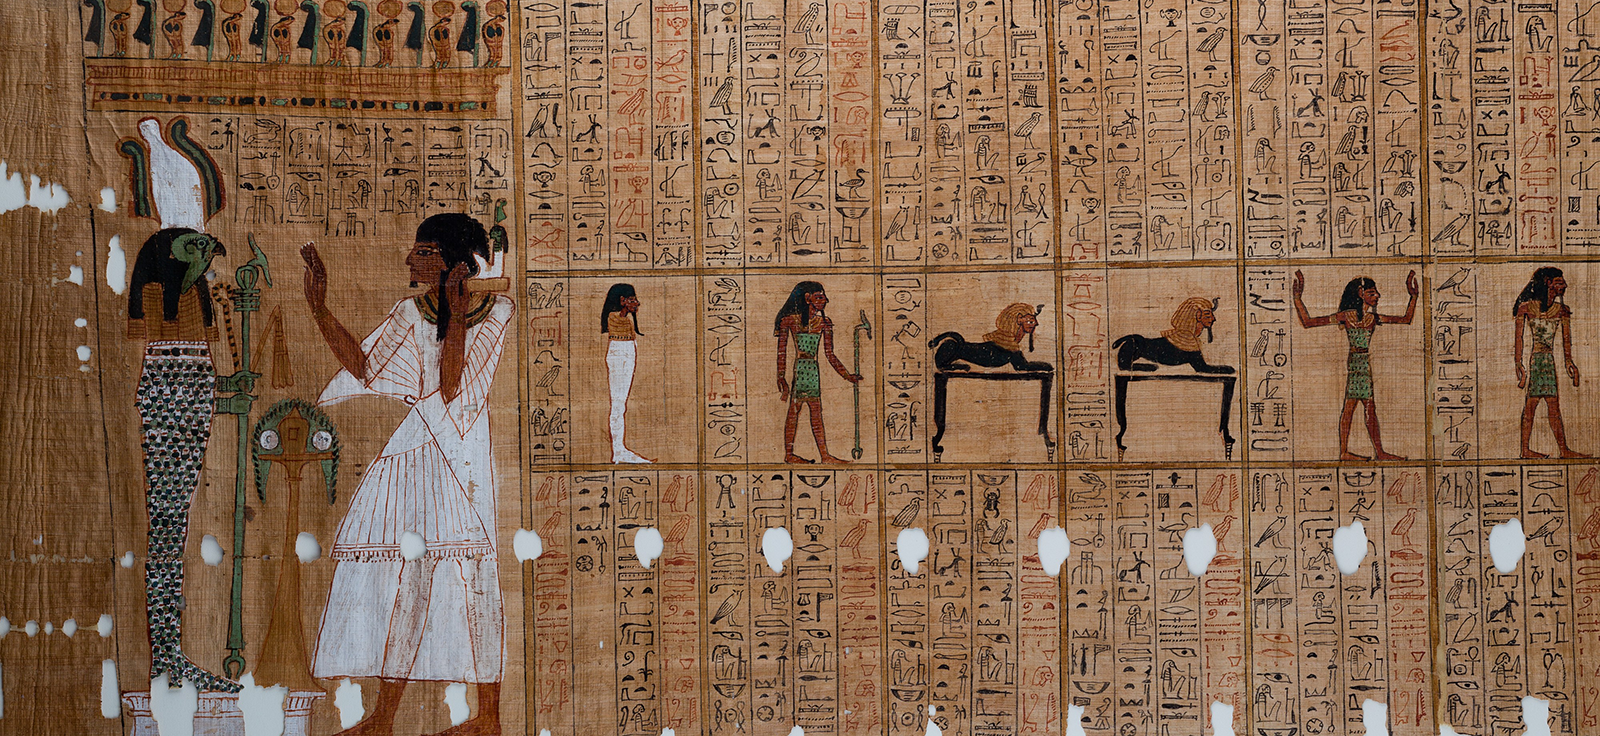 Excerpt from the Funerary Papyrus of the Steward Sethnakht, Egypt